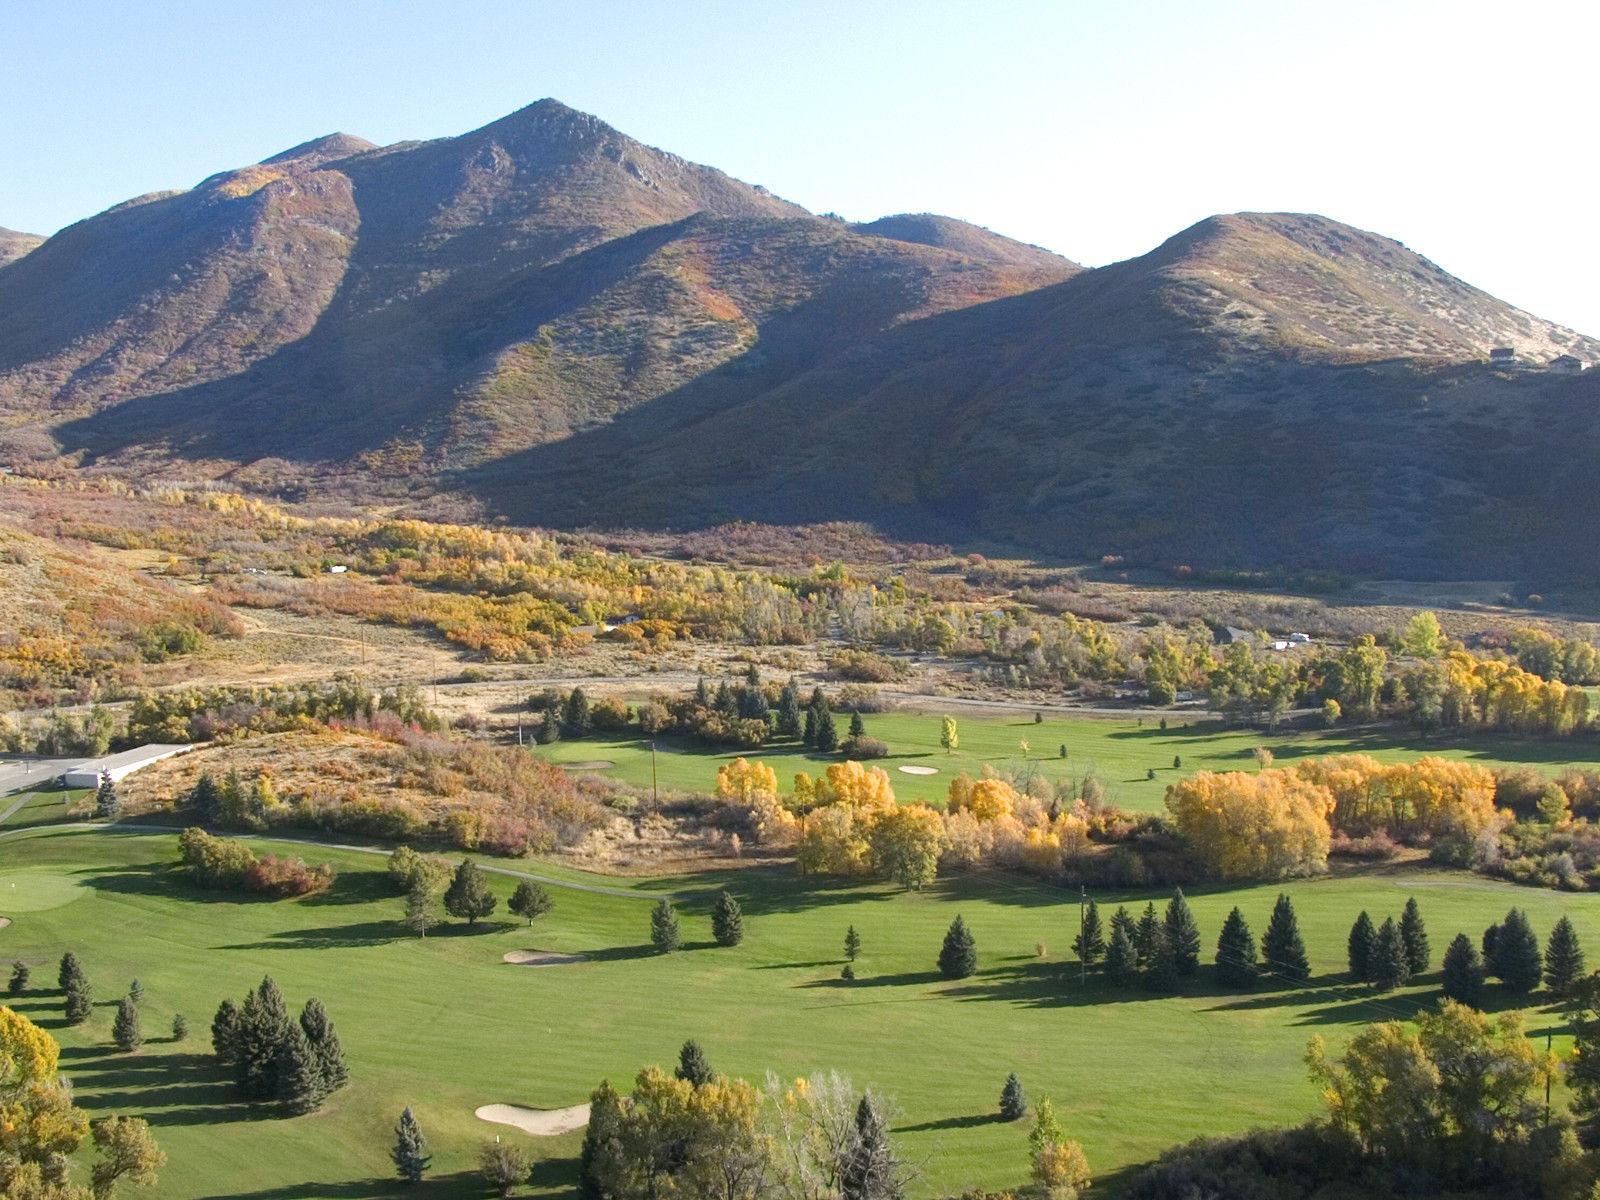 Wasatch State Park Lake Course &Pine Canyon